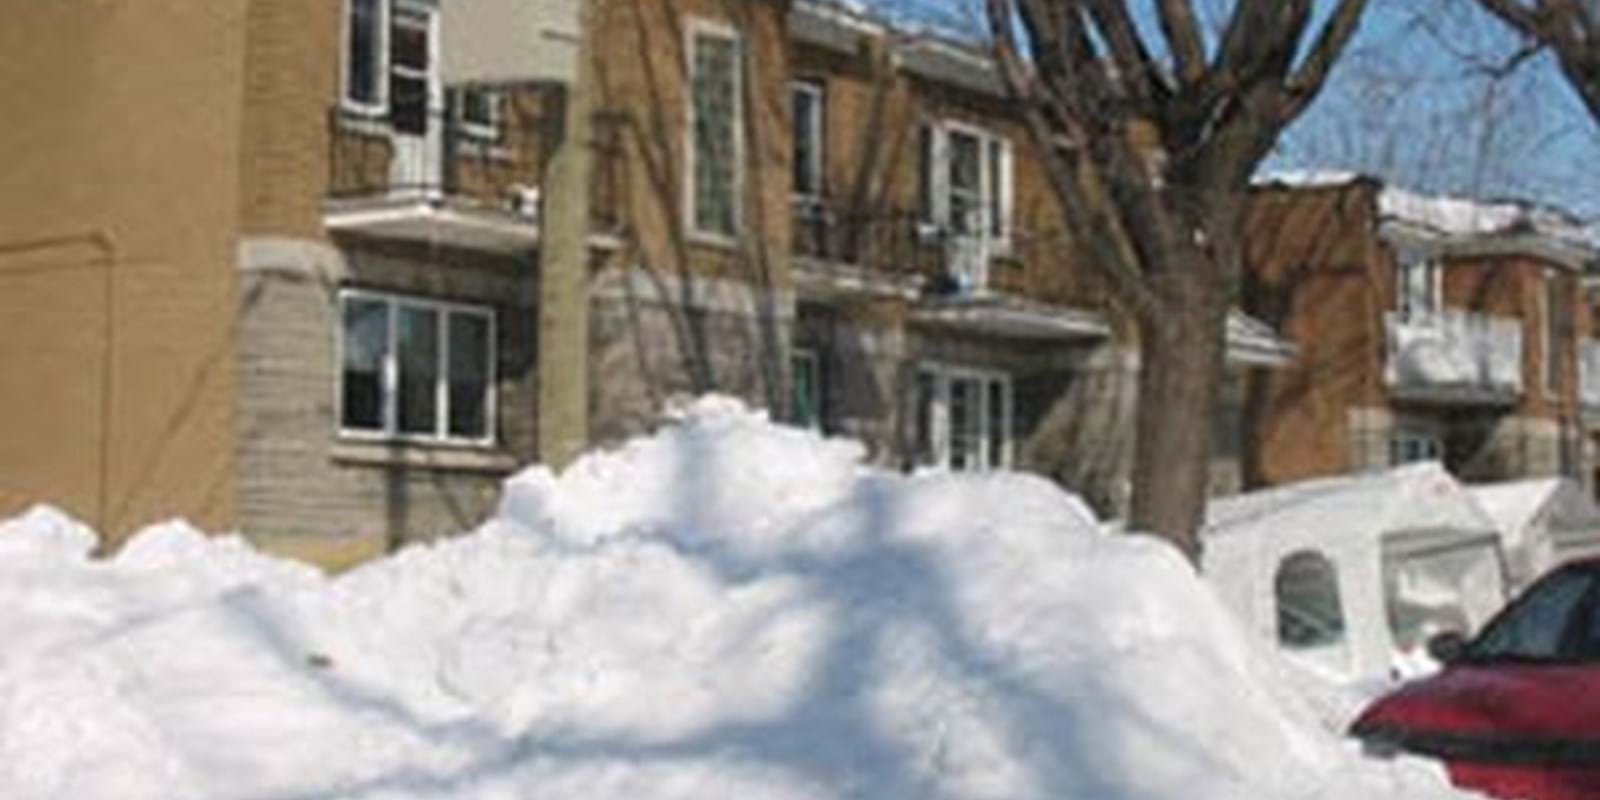 Melting snow: preventing water infiltration